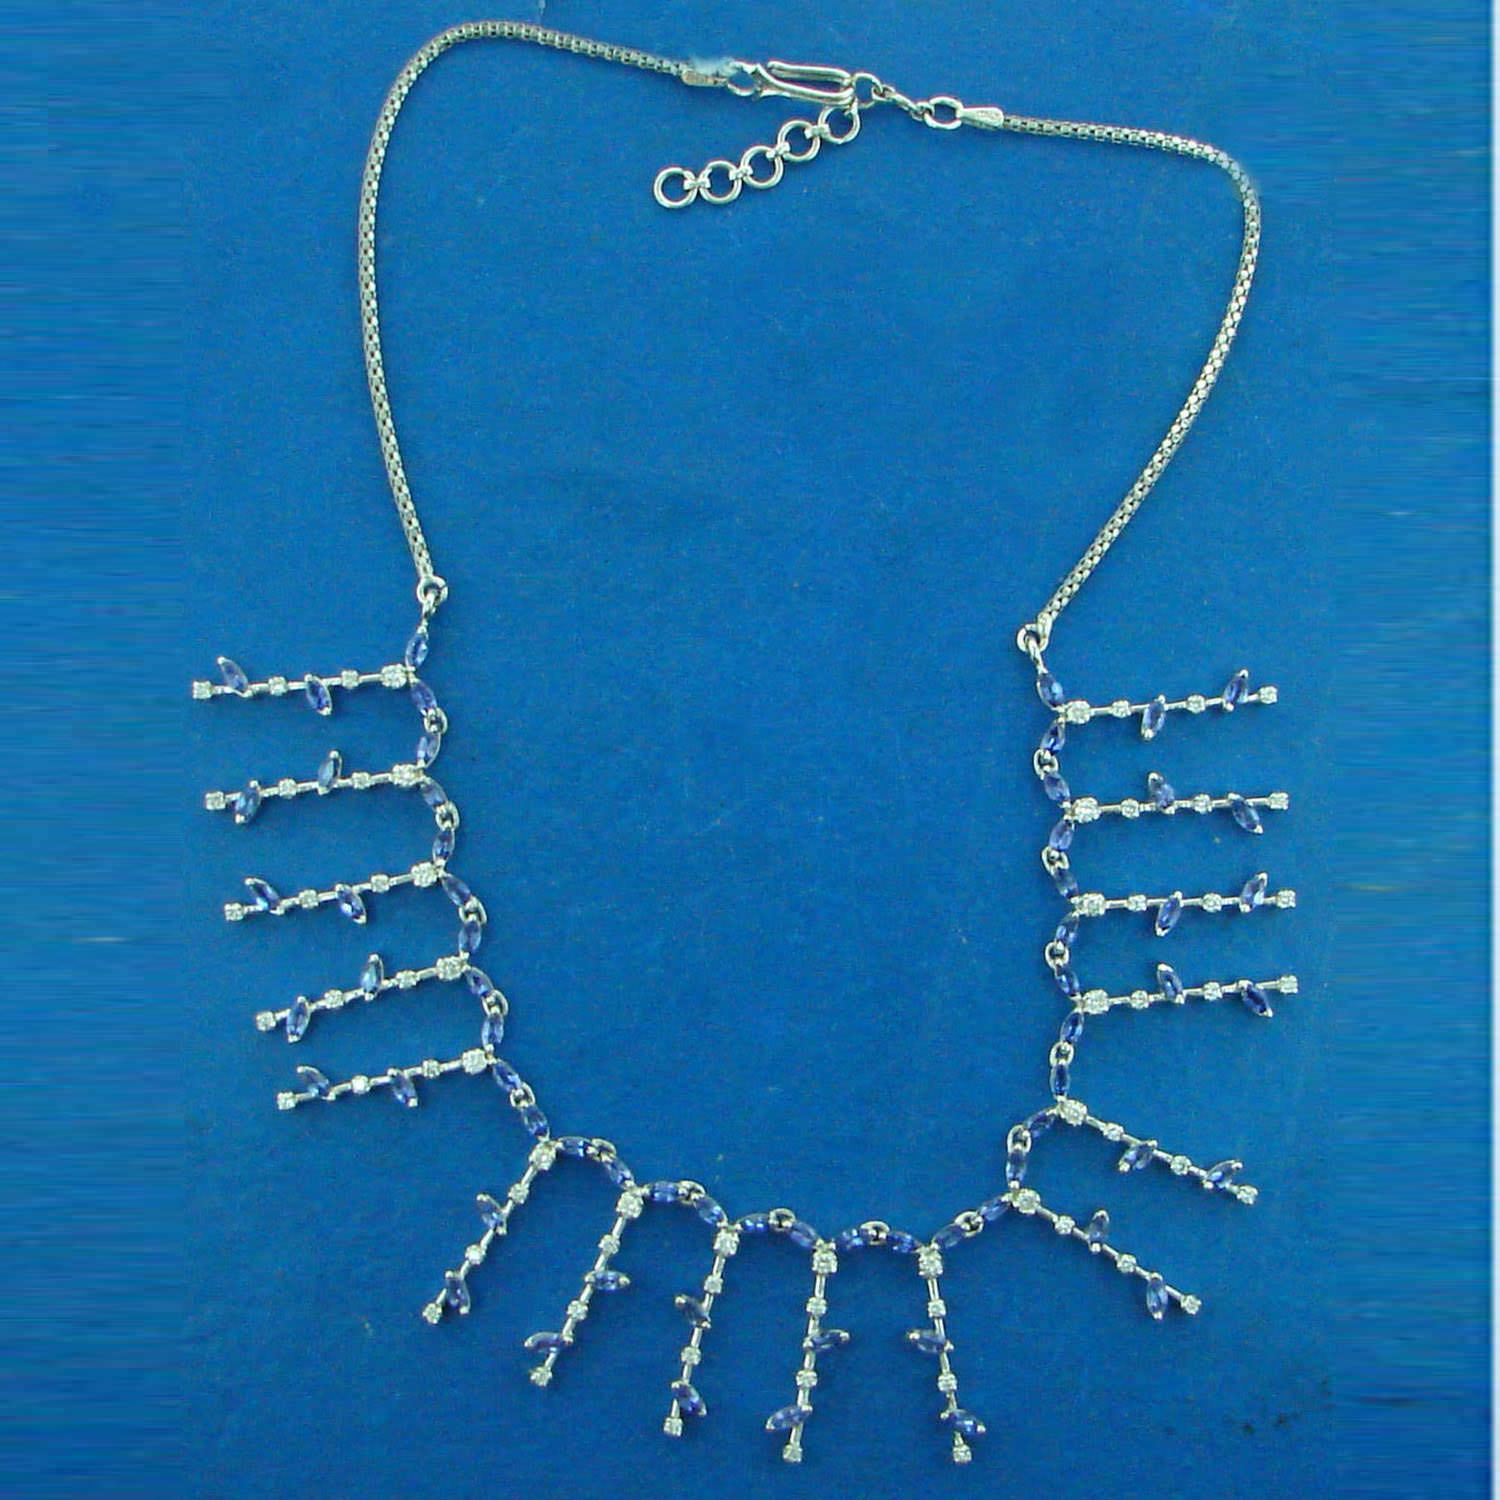 Mixed Cut Blue Sapphire Chain Necklace With Diamonds Made In 18k White Gold For Sale